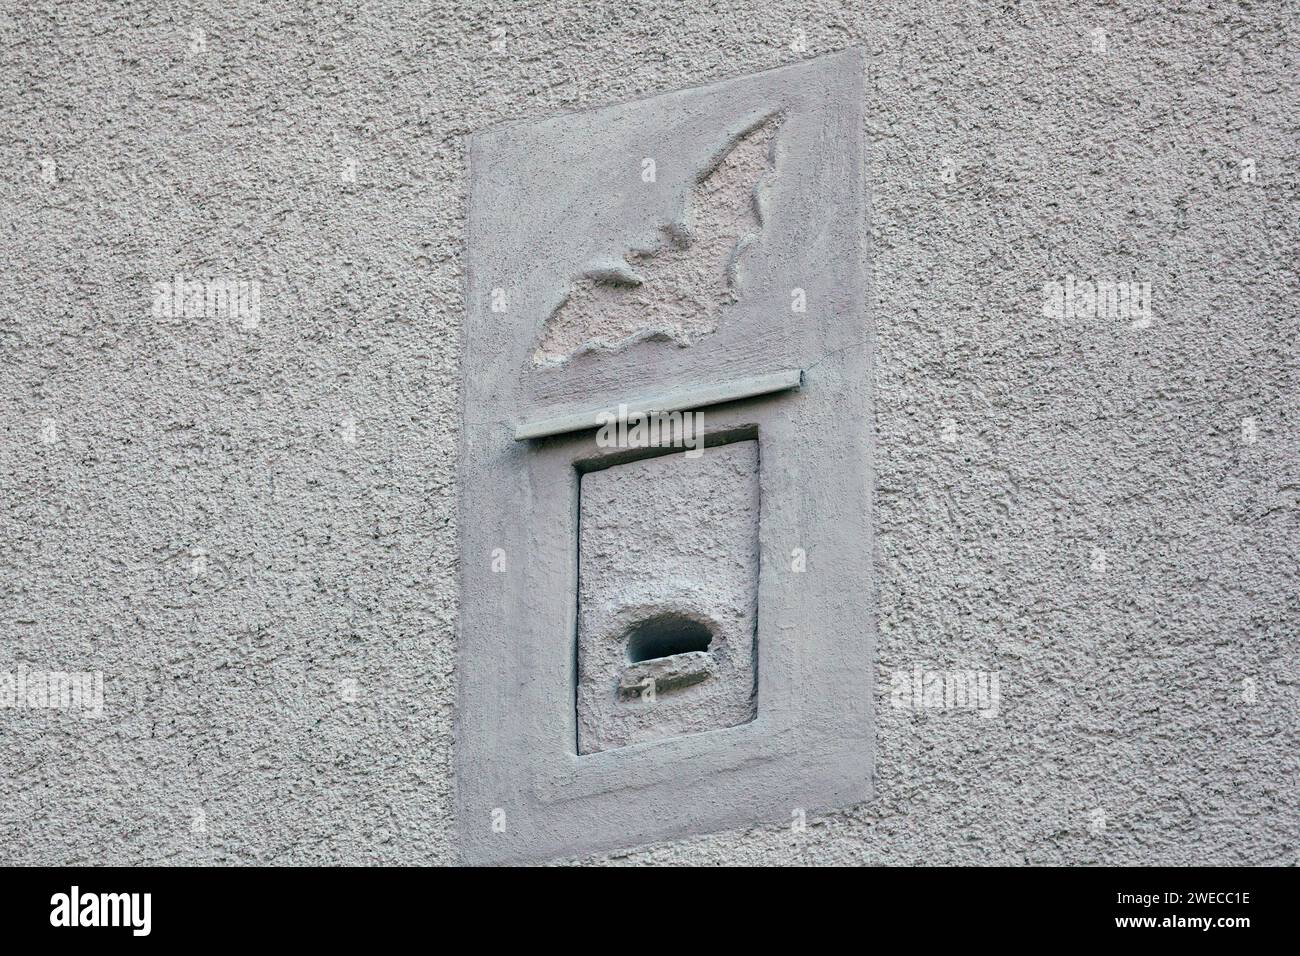 Nesting aids for bats on a house wall, Germany Stock Photo